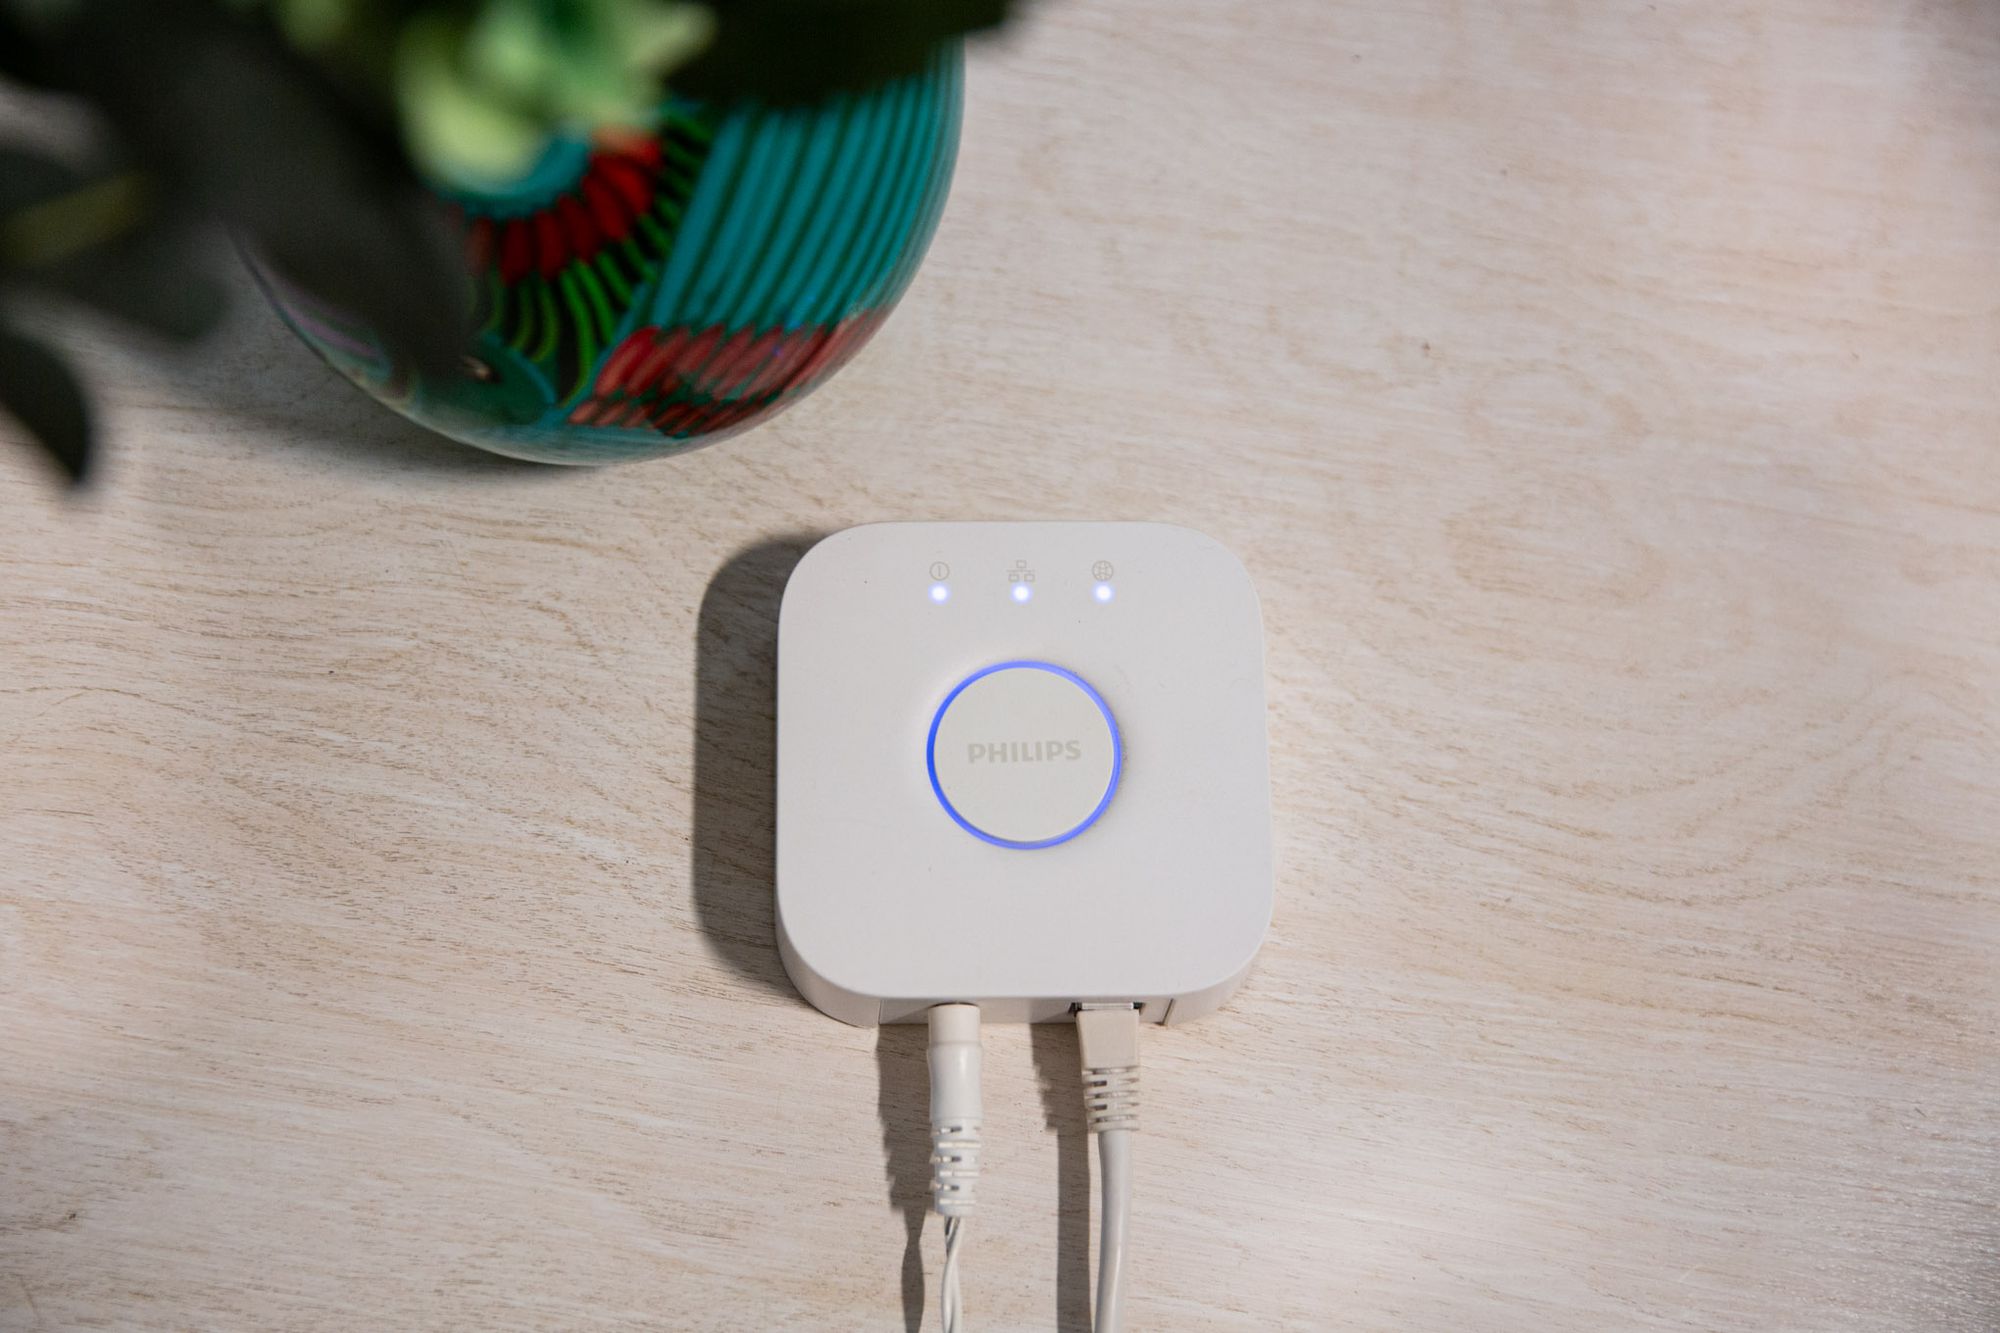 How To Connect Philips Hue Bridge To Wi-Fi